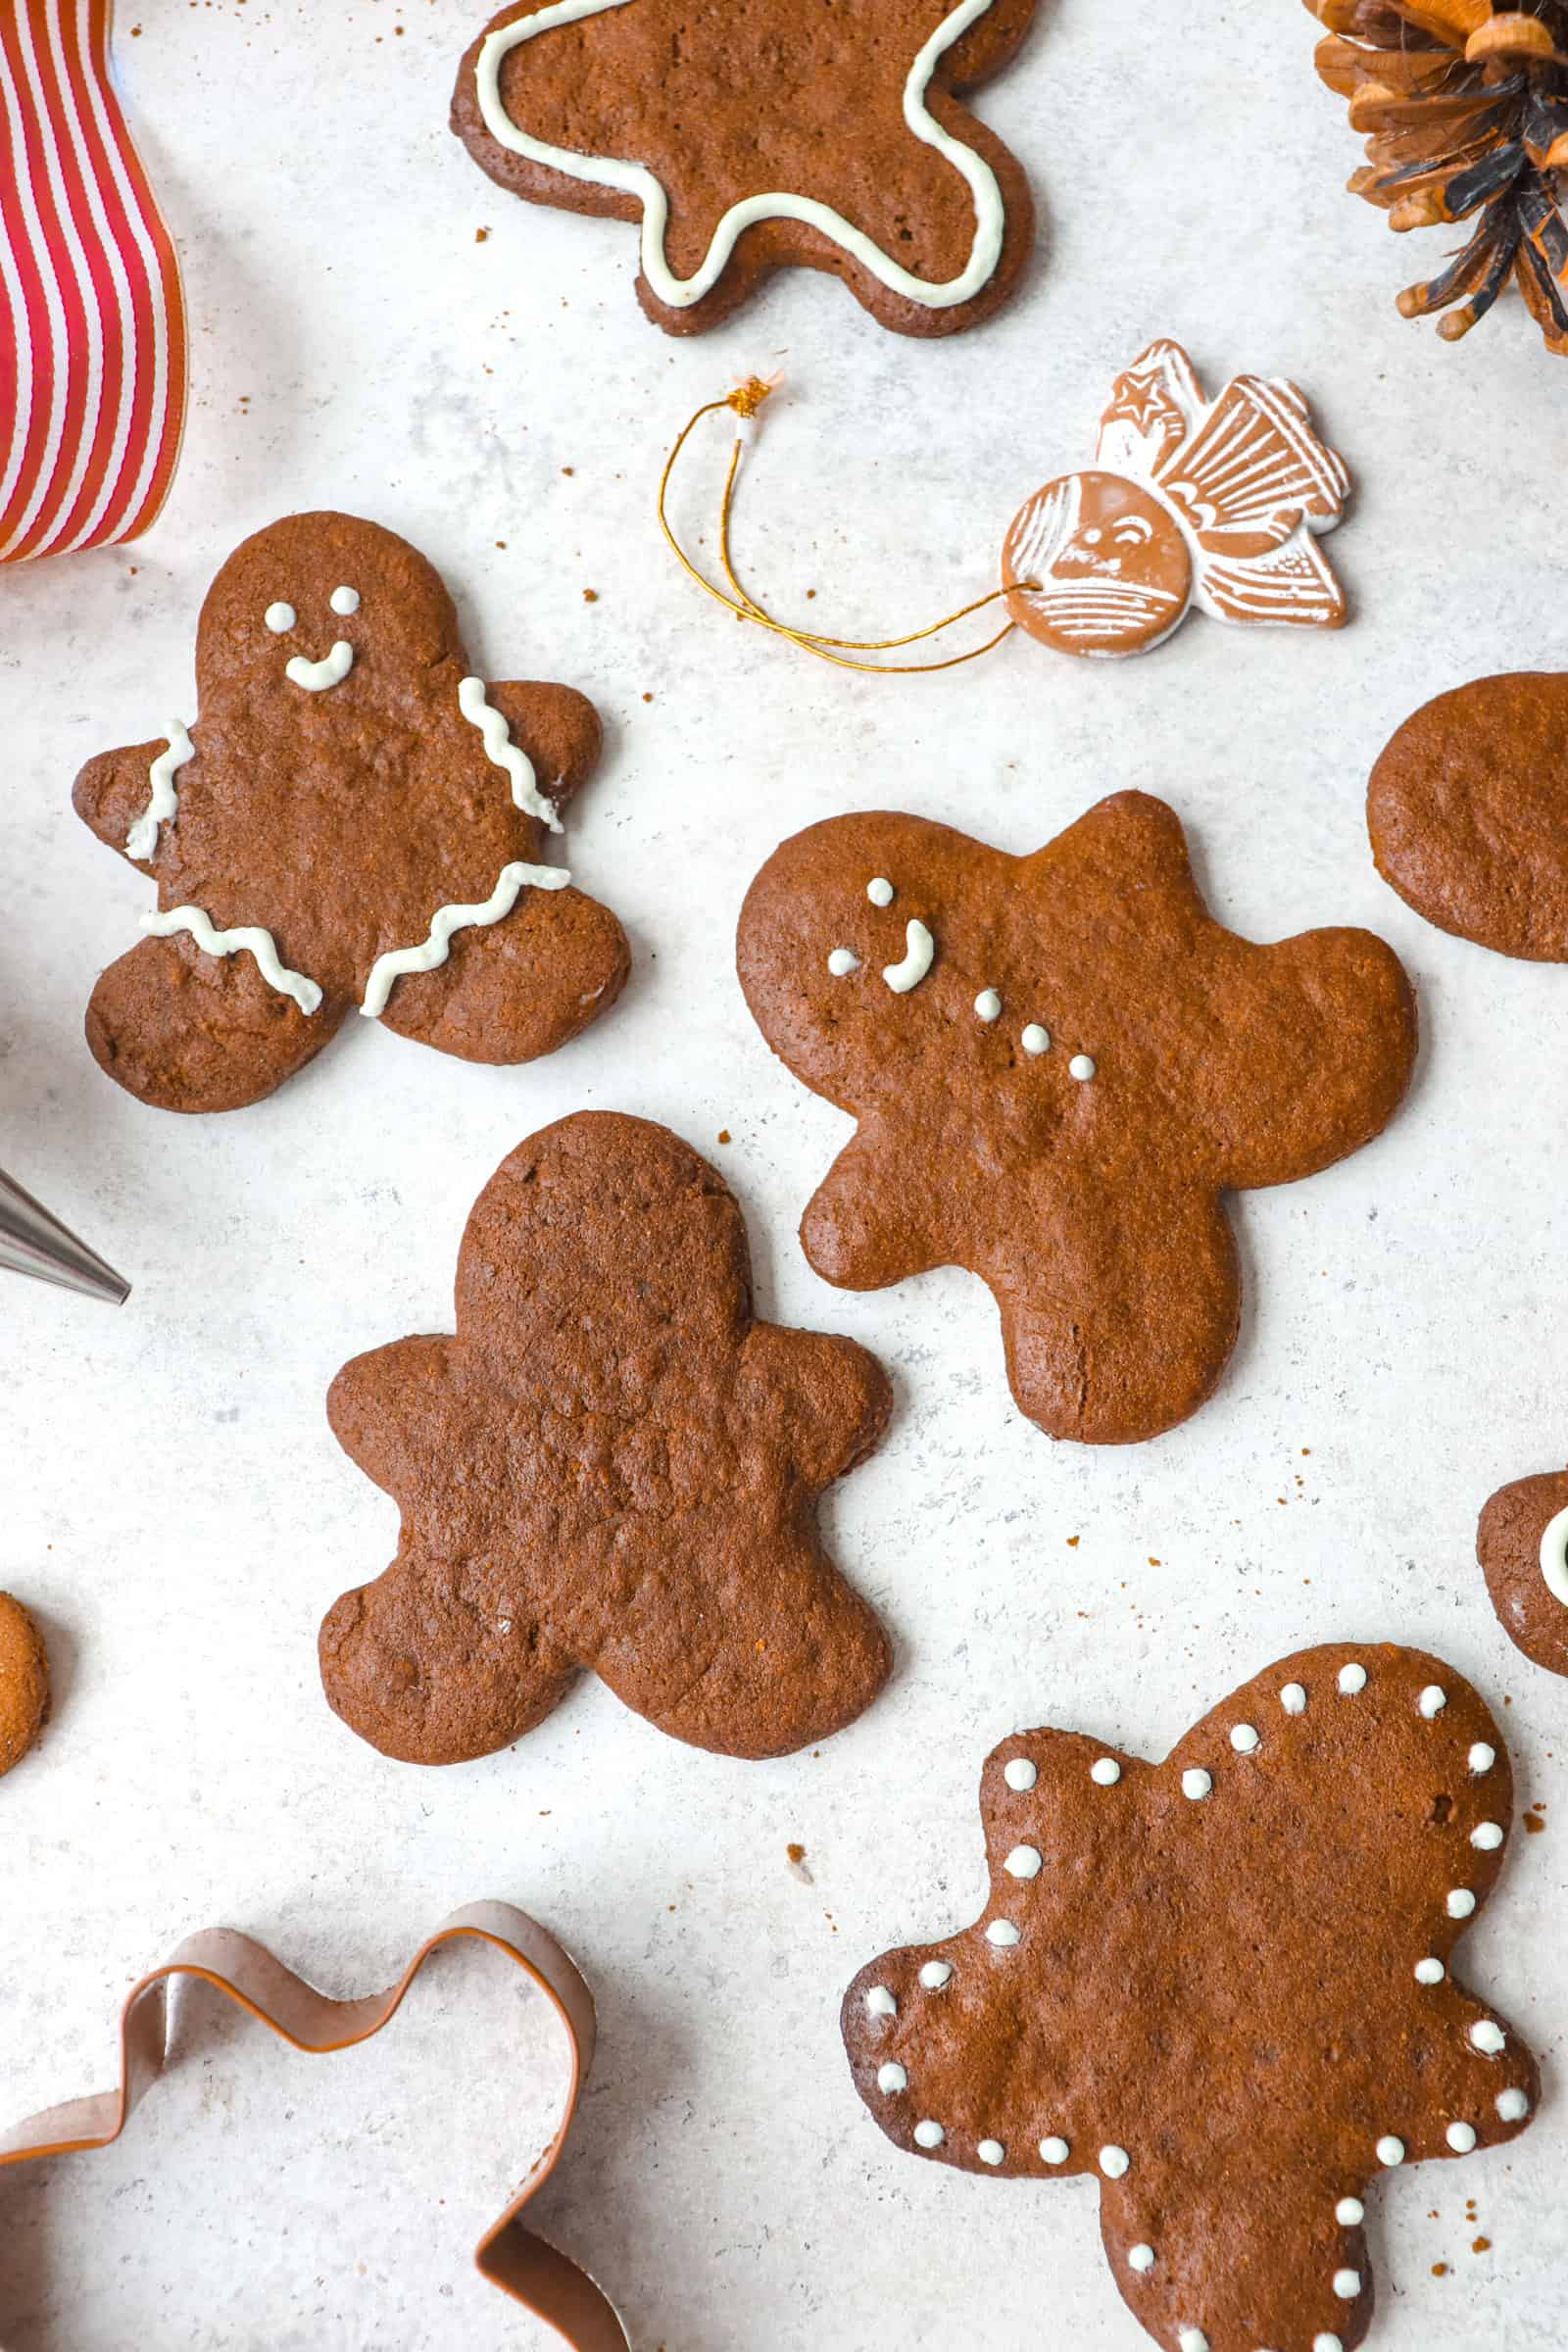 Gluten-Free Paleo/AIP Gingerbread Cookies • Heal Me Delicious